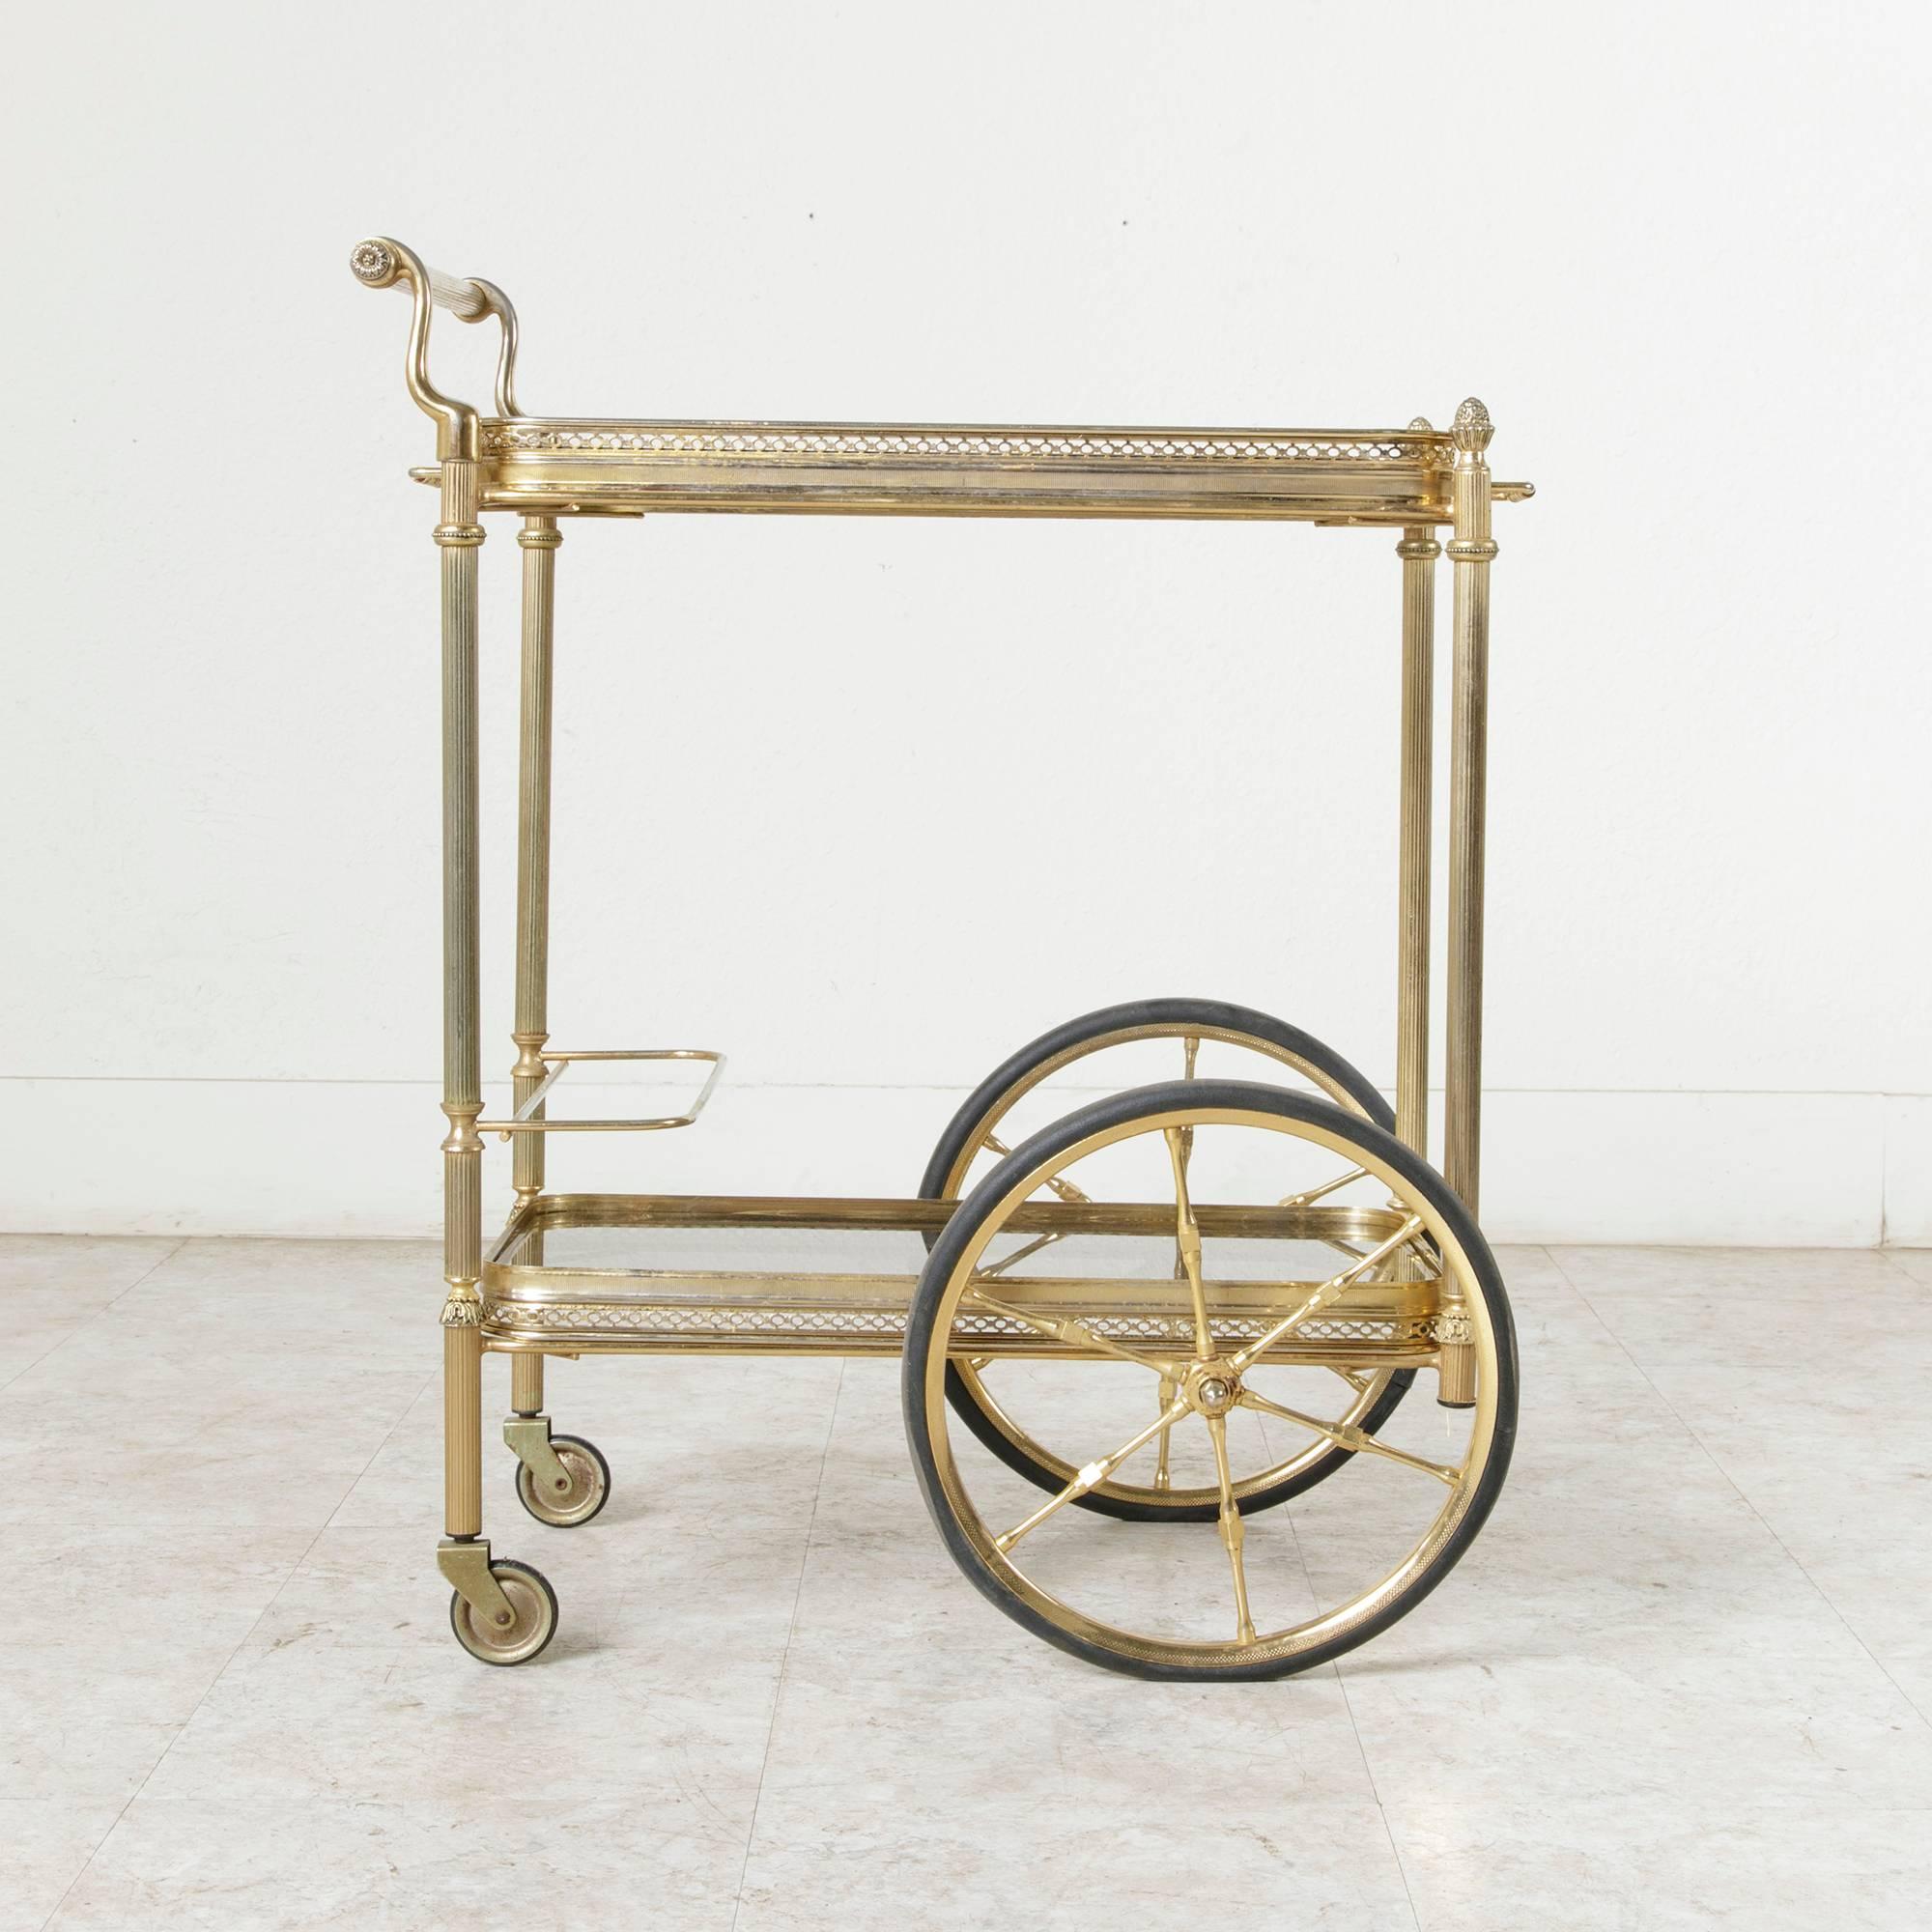 This mid-20th century brass bar cart from France features a brass gallery around each of its smoked glass shelves. Its top shelf is a removable tray, and its four legs are capped with Louis XVI pine cone finials. An elegant piece that is very